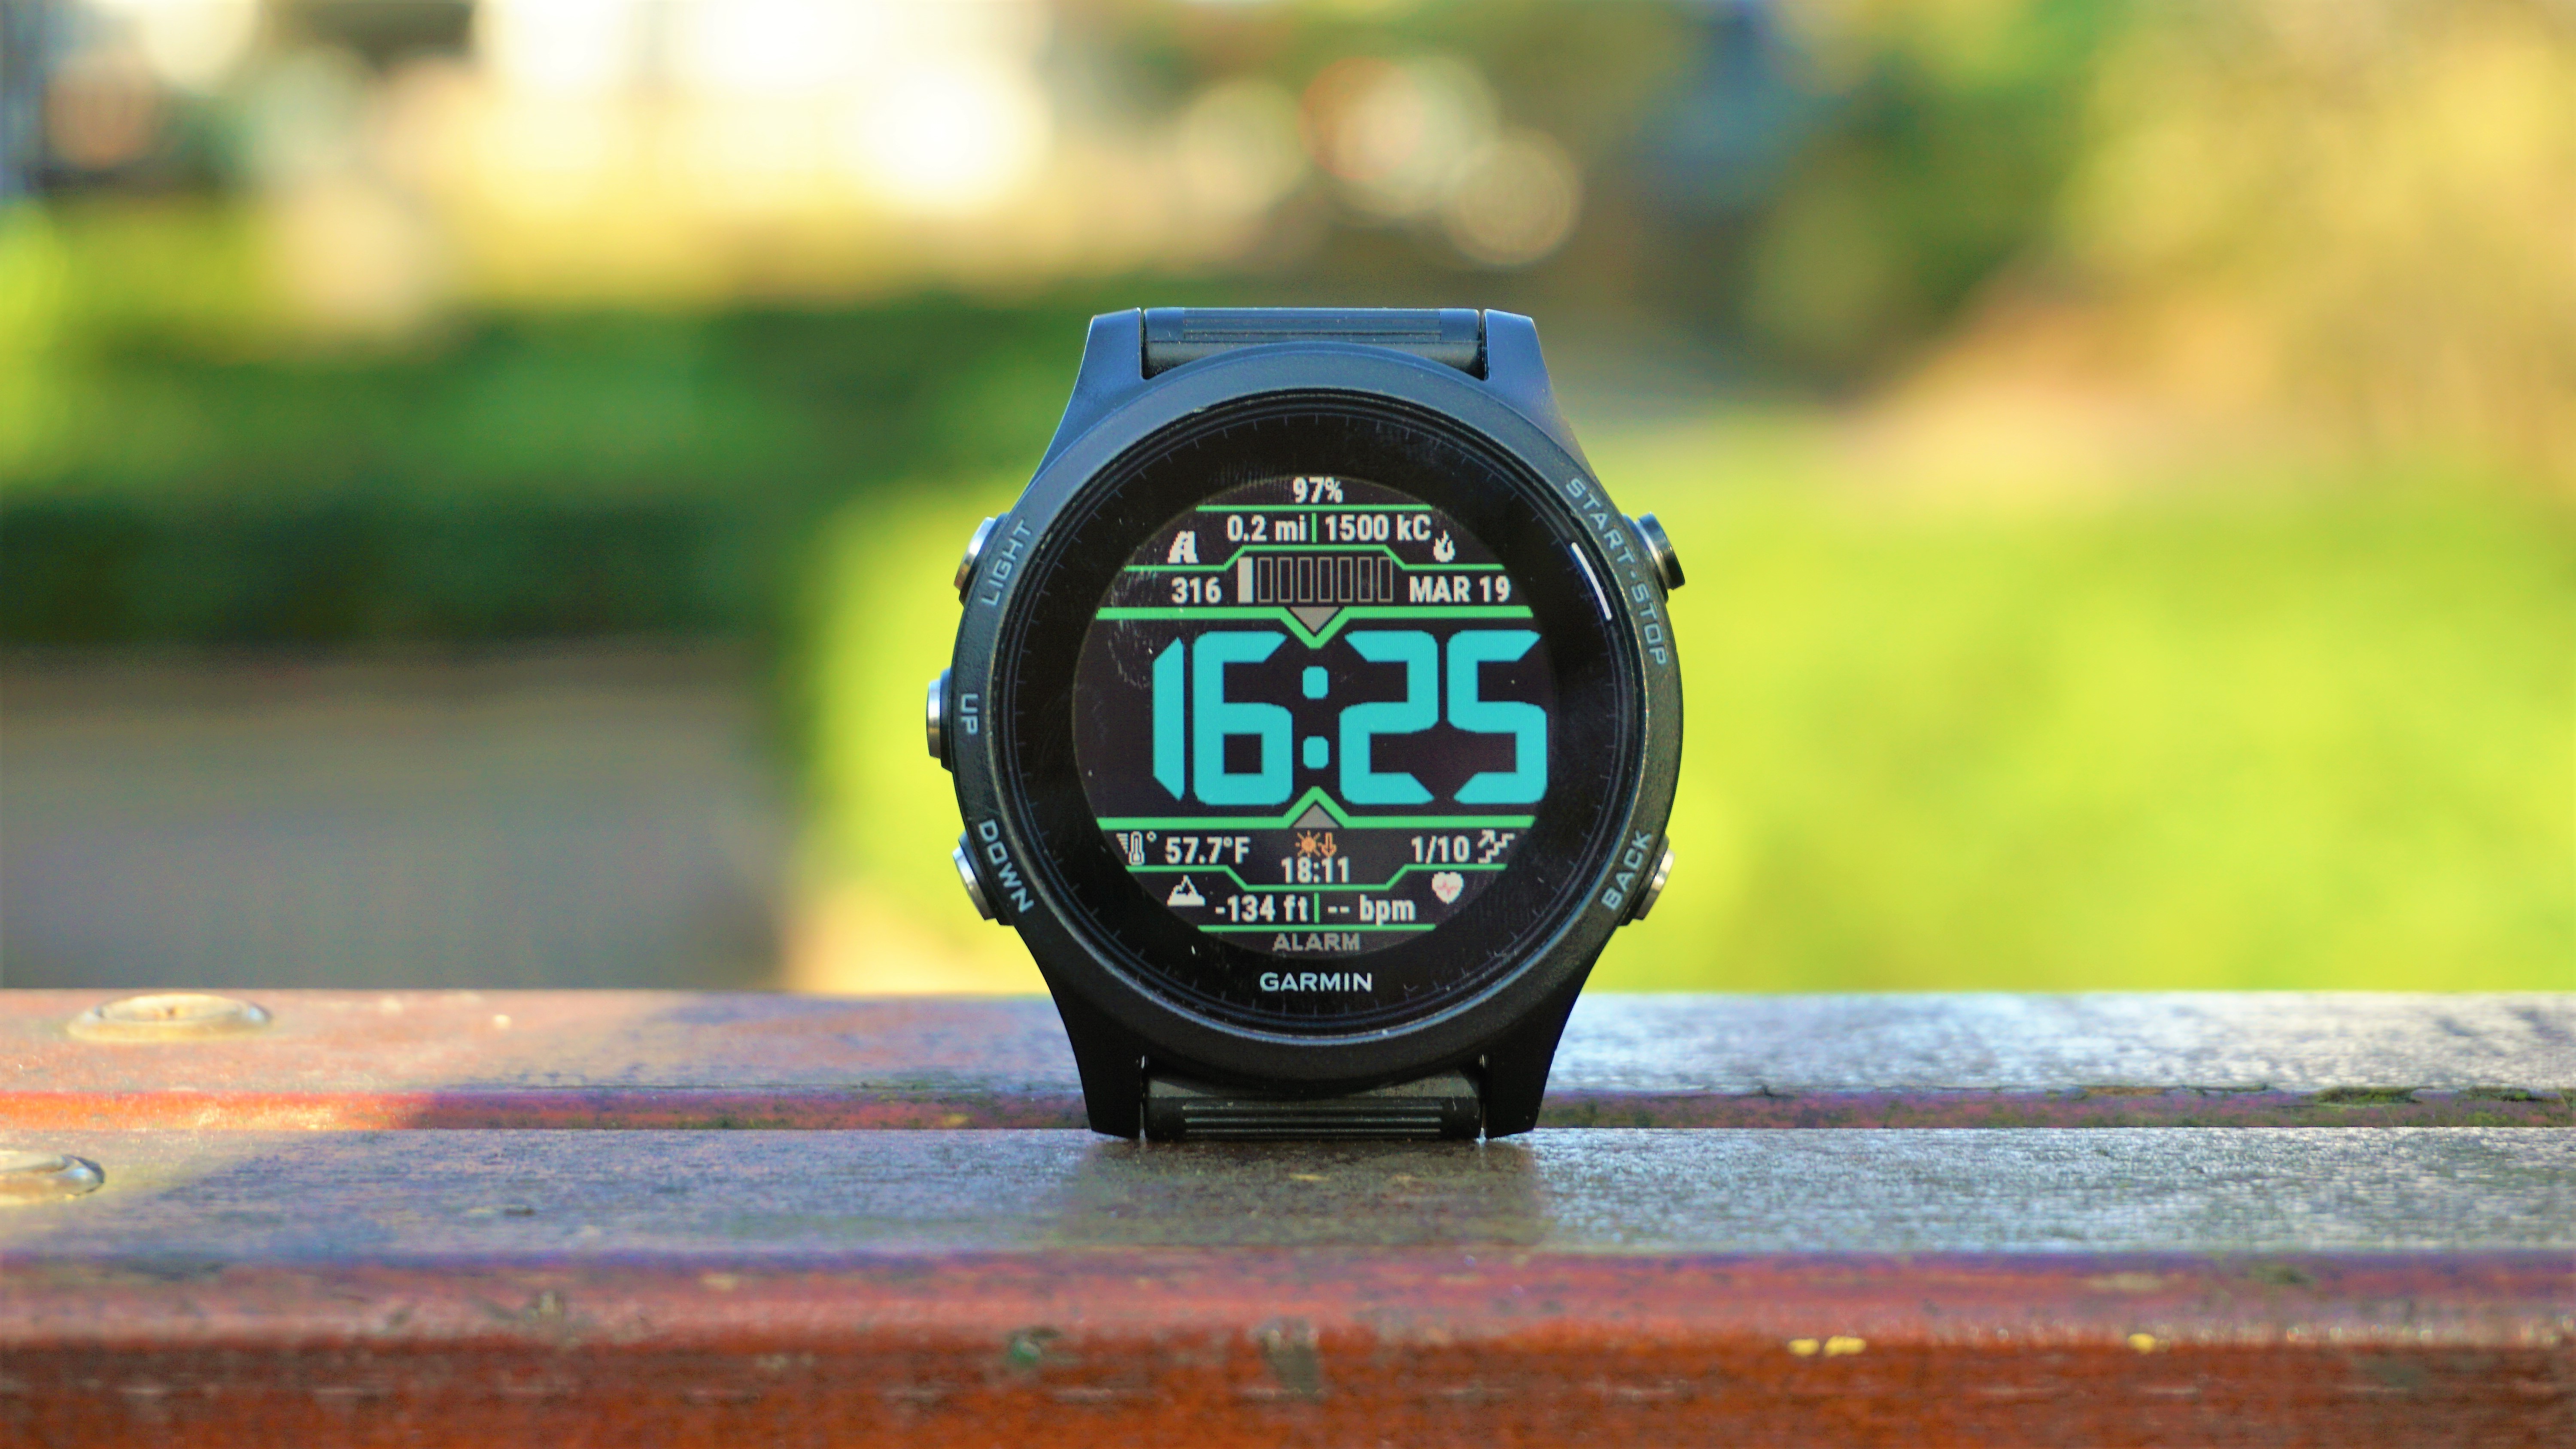 Garmin's Forerunner 935 comes with a lot of fitness features built-in.